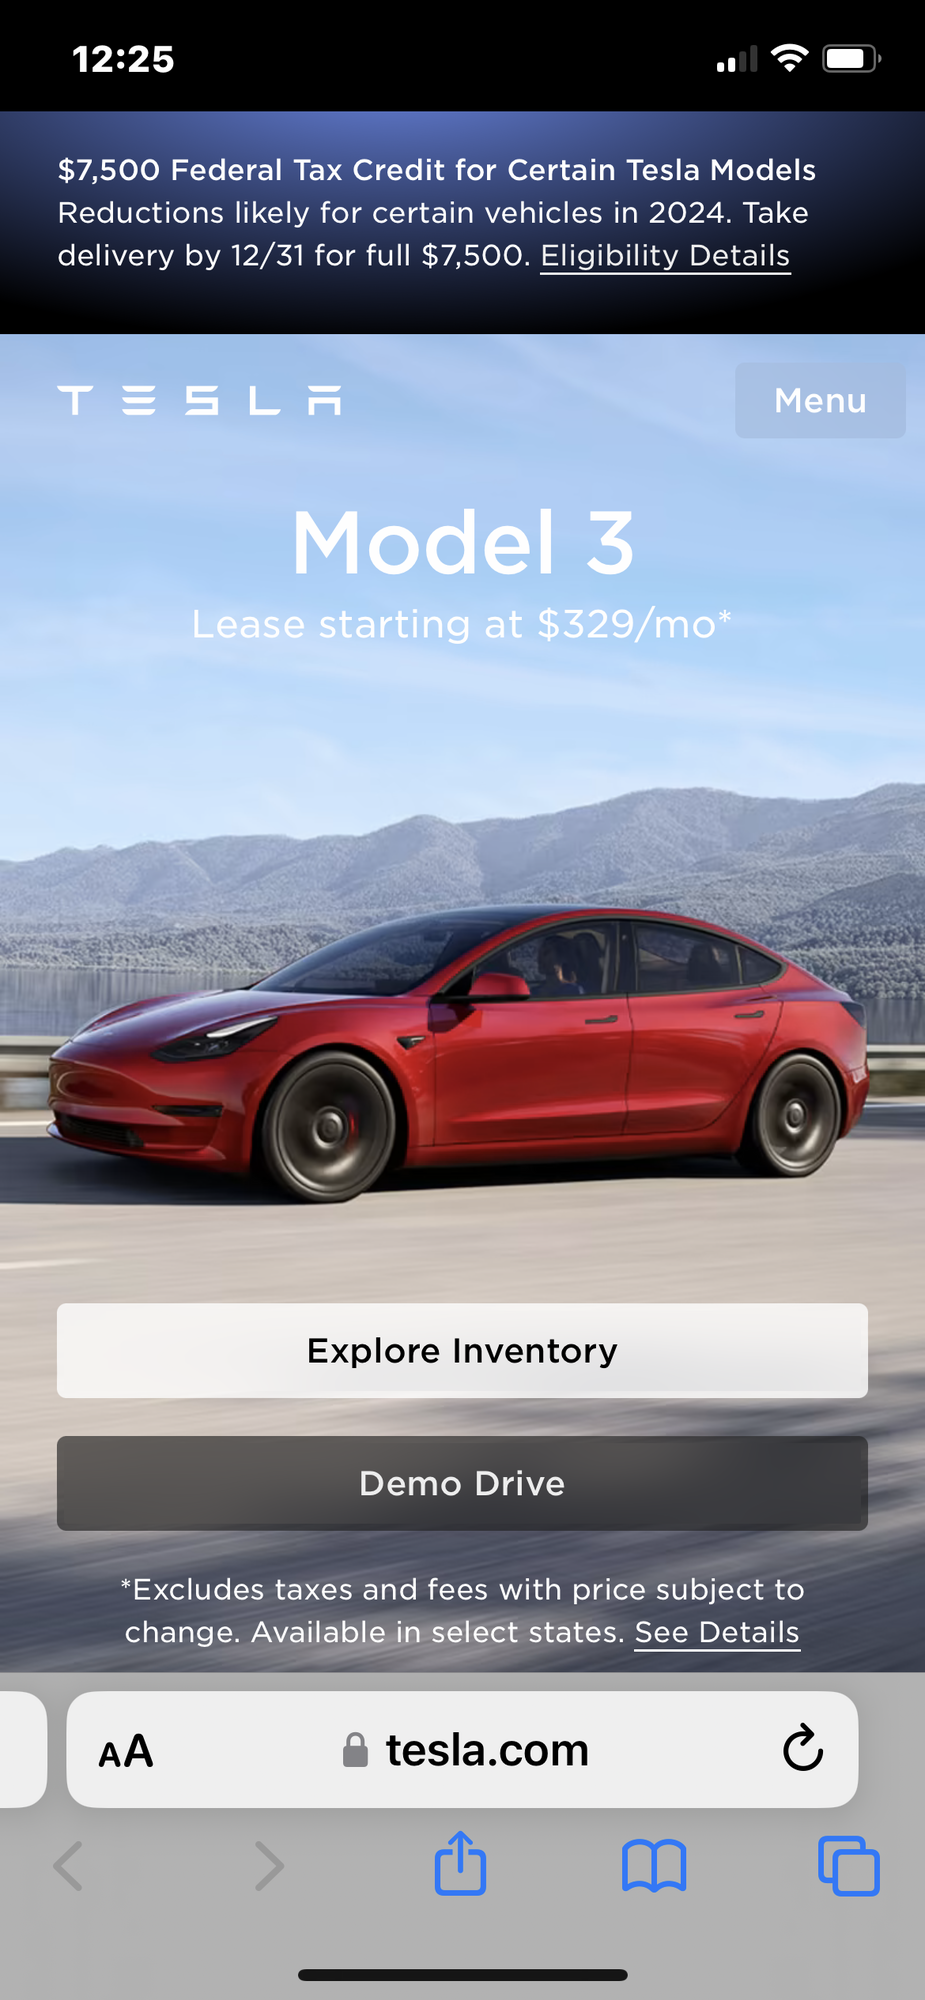 Our Tesla Model 3 Highland Has Arrived! Here Are Its Top 3